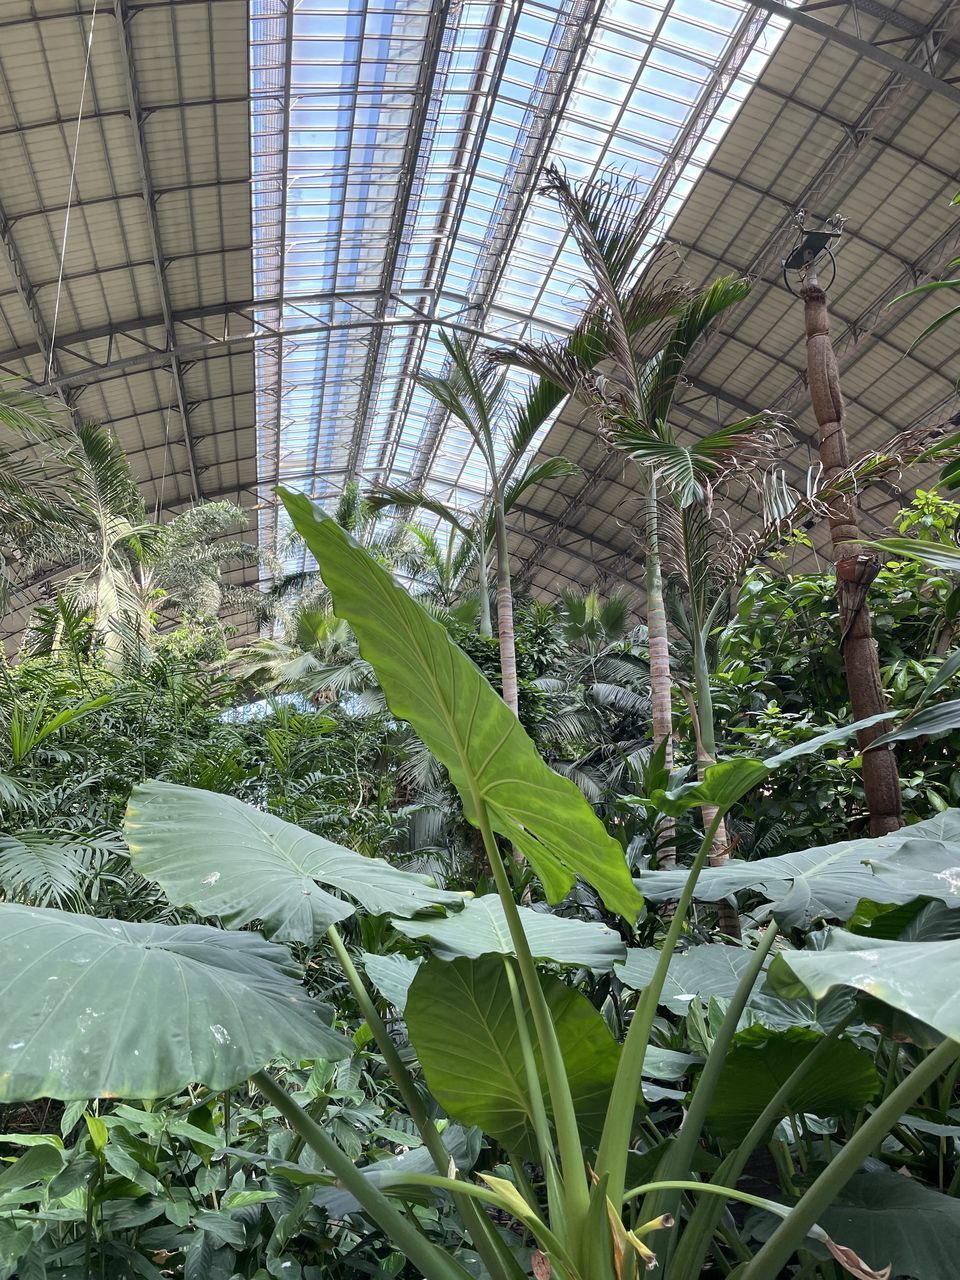 VIEW OF GREENHOUSE